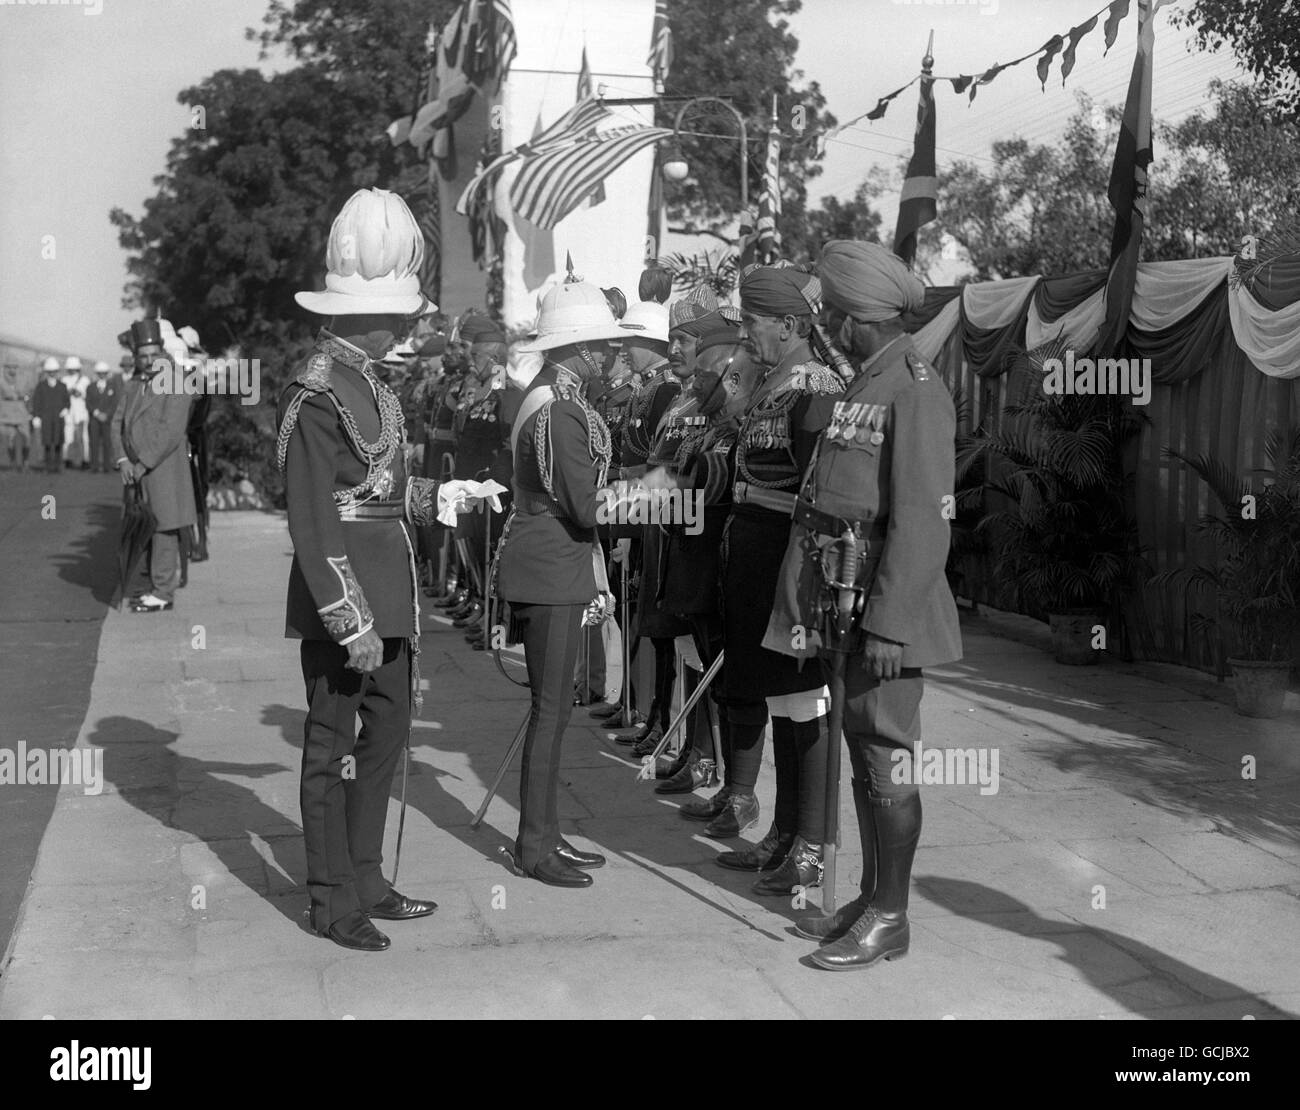 THE PRINCE OF WALES' TOUR OF JAPAN AND THE FAR EAST: DELHI. ON ARRIVAL AT SELIMGURGH STATION OFFICERS OF THE INDIAN ARMY HEADQUARTERS STAFF ARE PRESENTED TO HRH BY LORD RAWLINSON, COMMANDER-IN-CHIEF IN INDIA. 14TH FEBRUARY 1922. Stock Photo